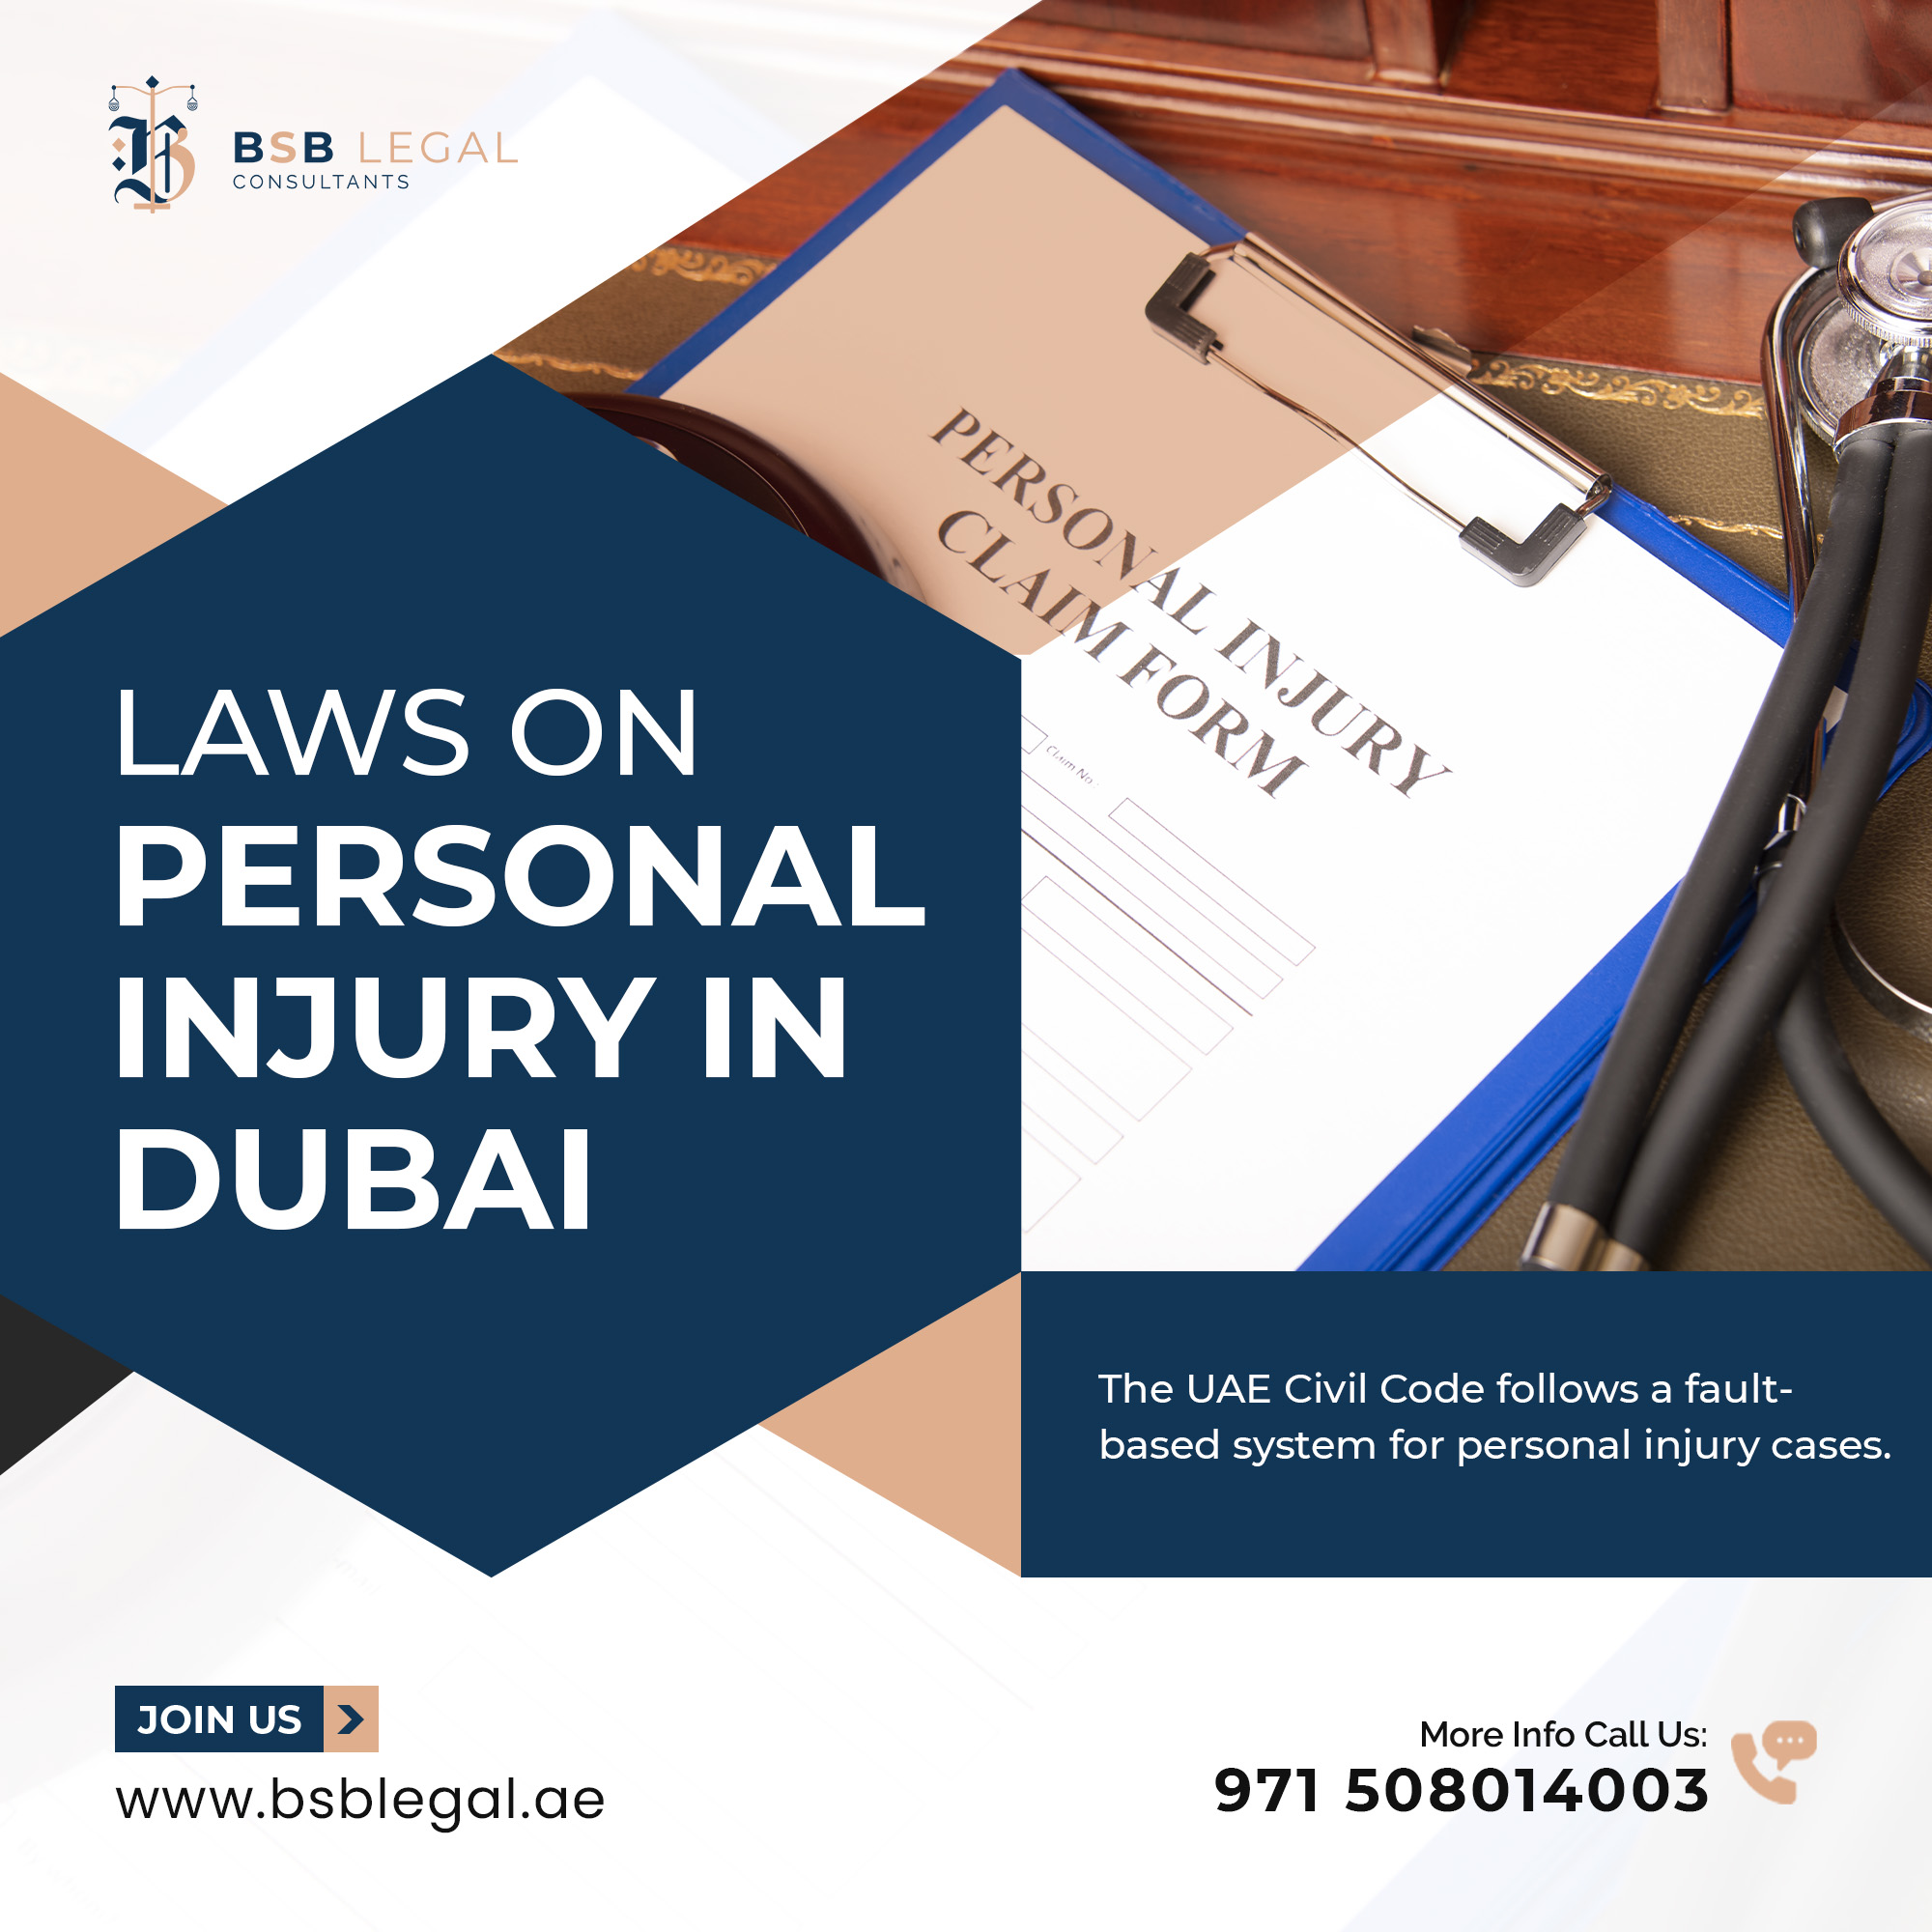 Laws on personal injury in Dubai